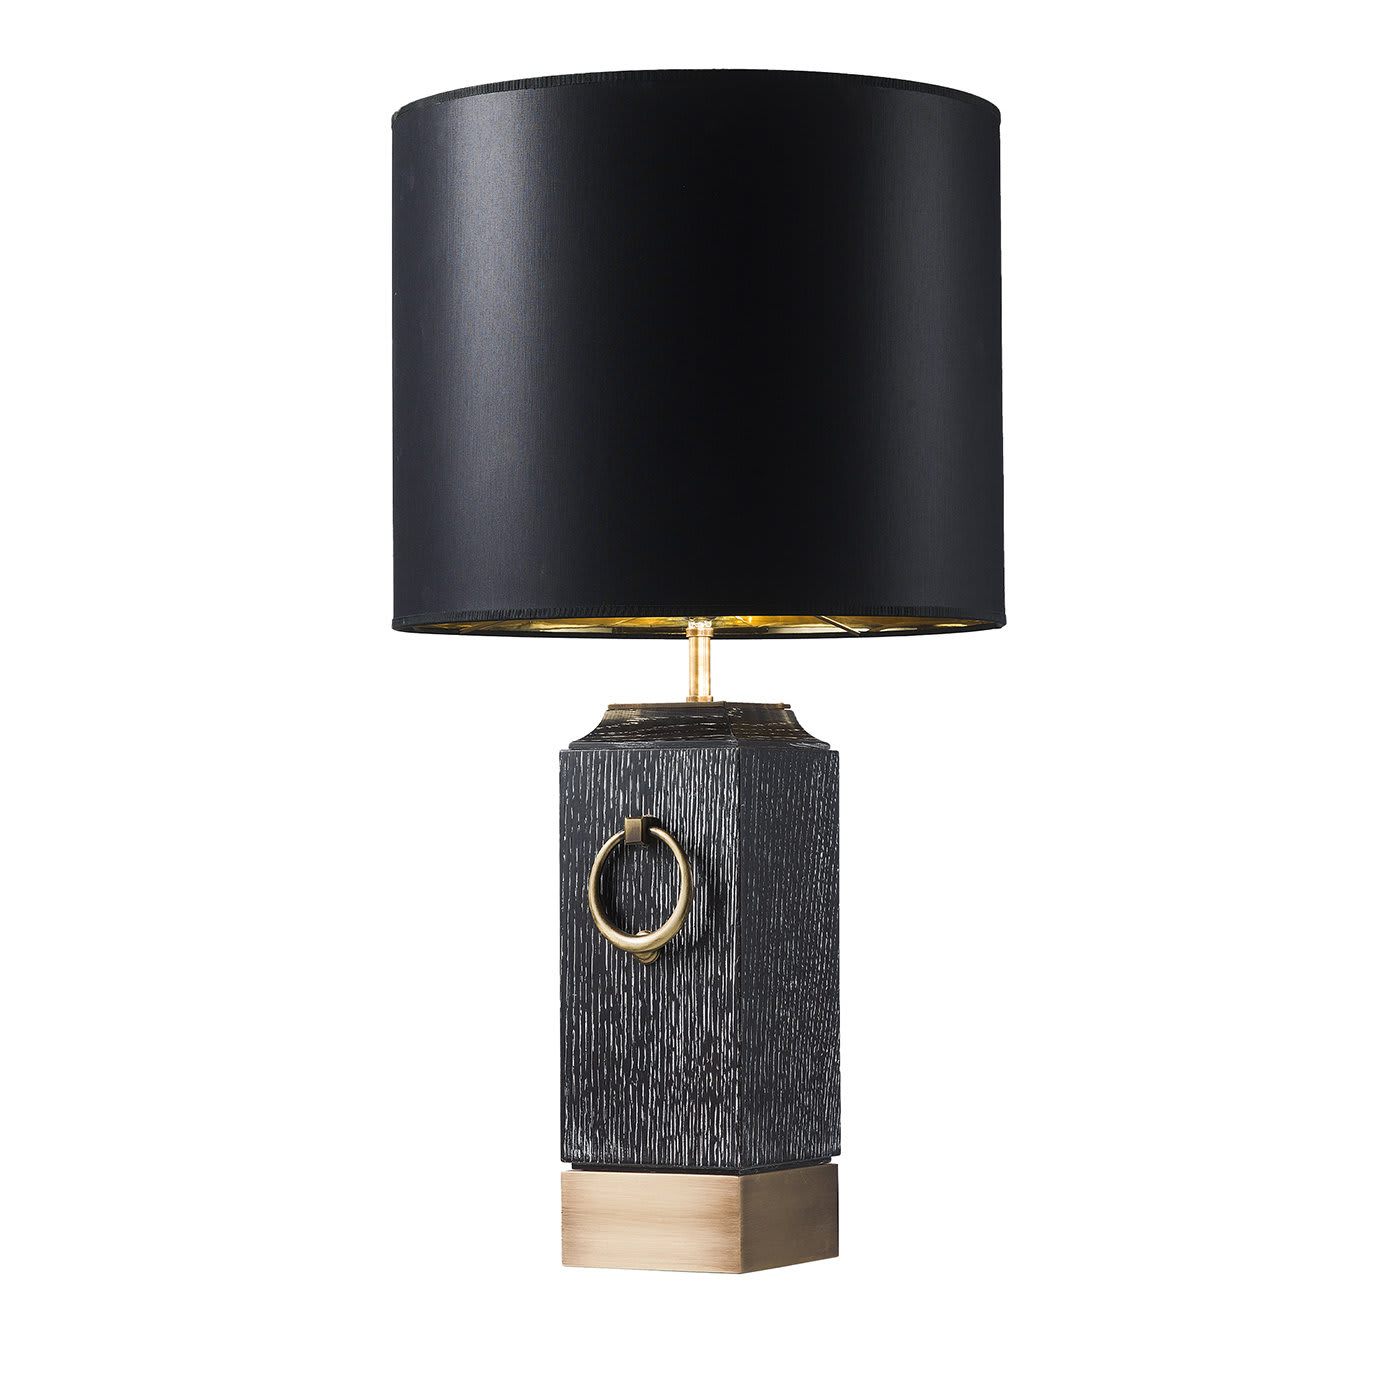 Durmast Table Lamp with Rings by Michele Bonan - Chelini